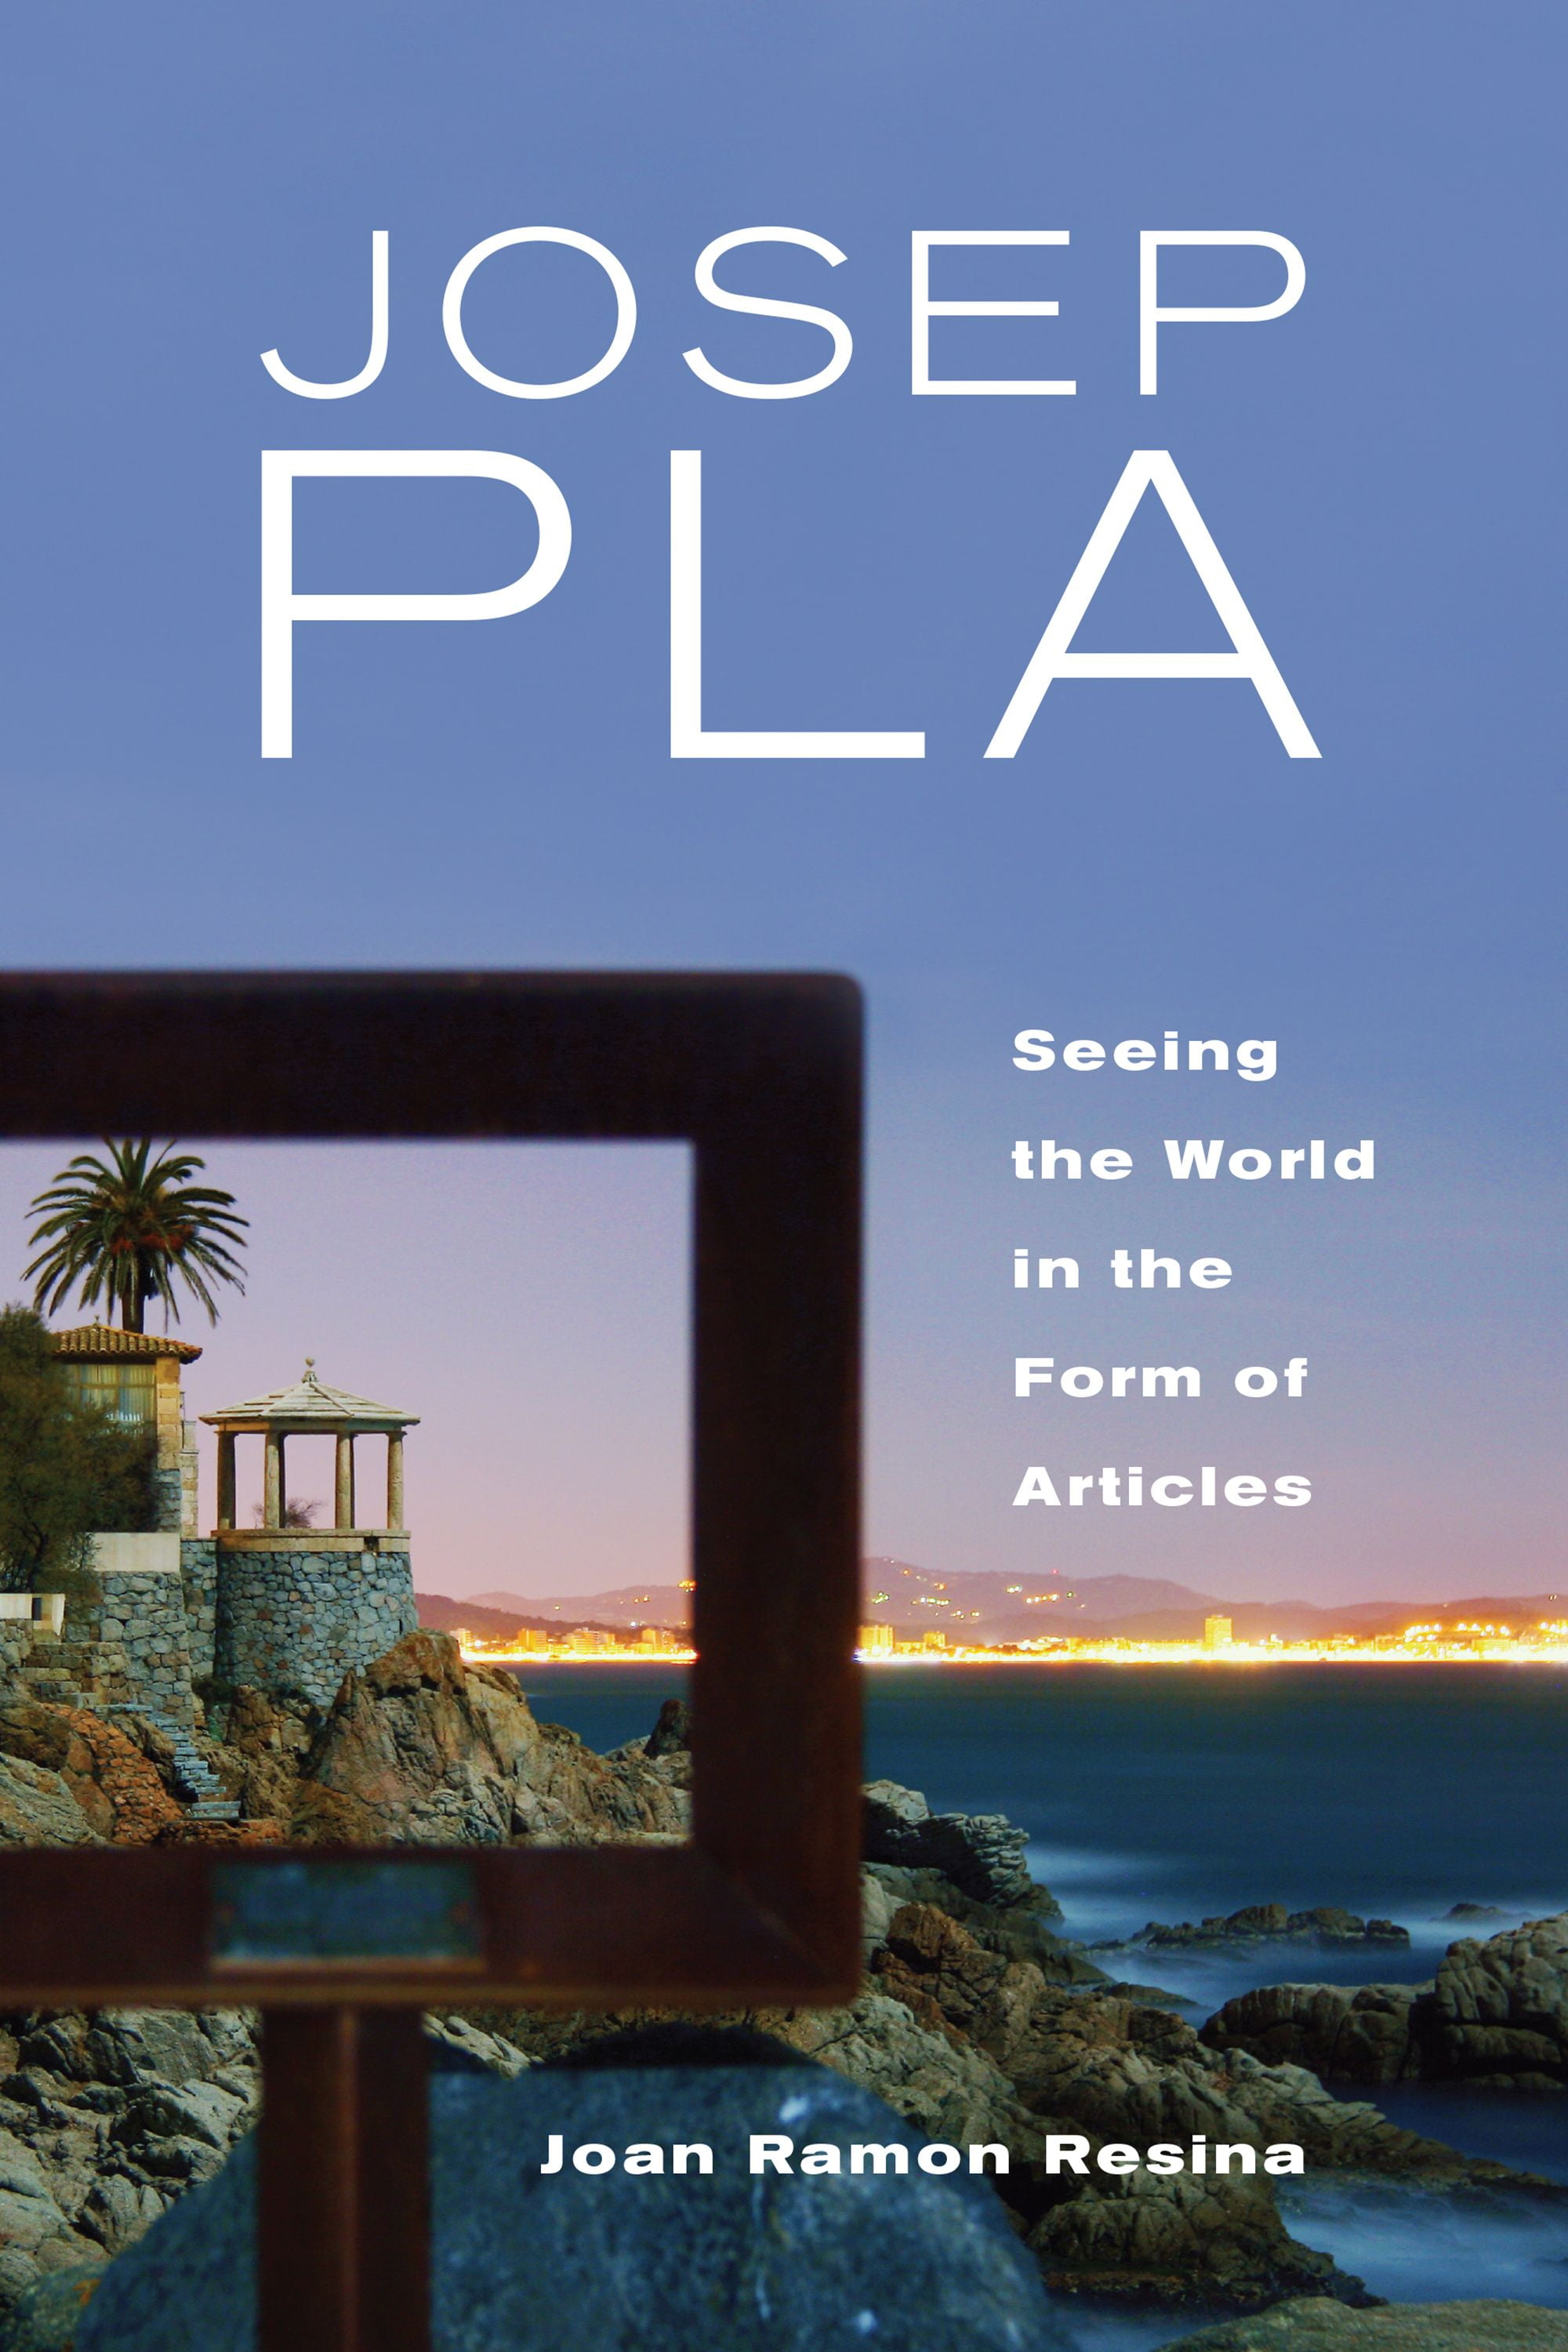 Josep Pla Seeing the World in the Form of Articles Toronto Iberic
Epub-Ebook